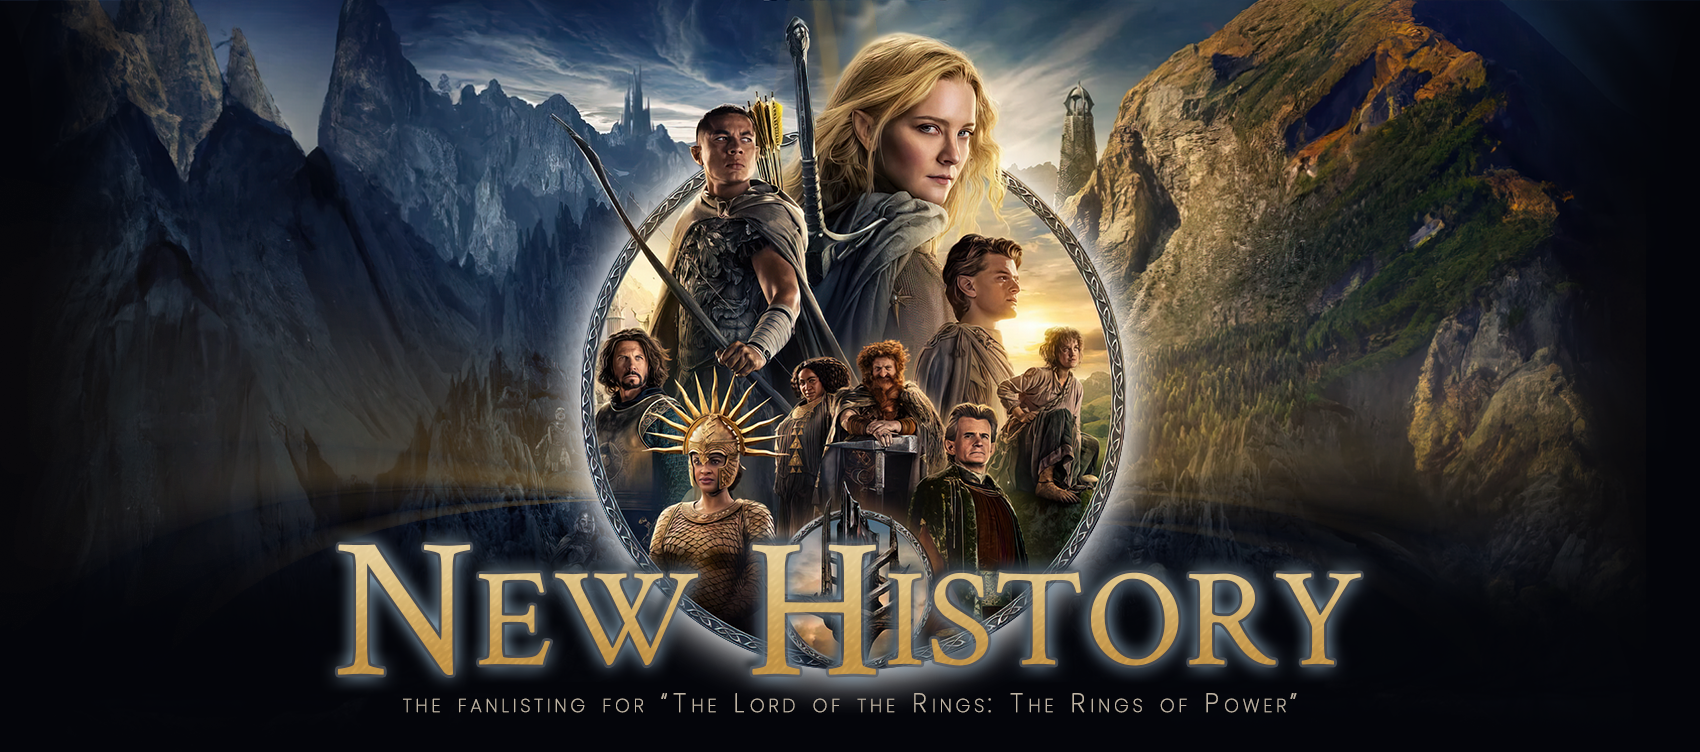 New History, the fanlisting for The Lord of the Rings: The Rings of Power